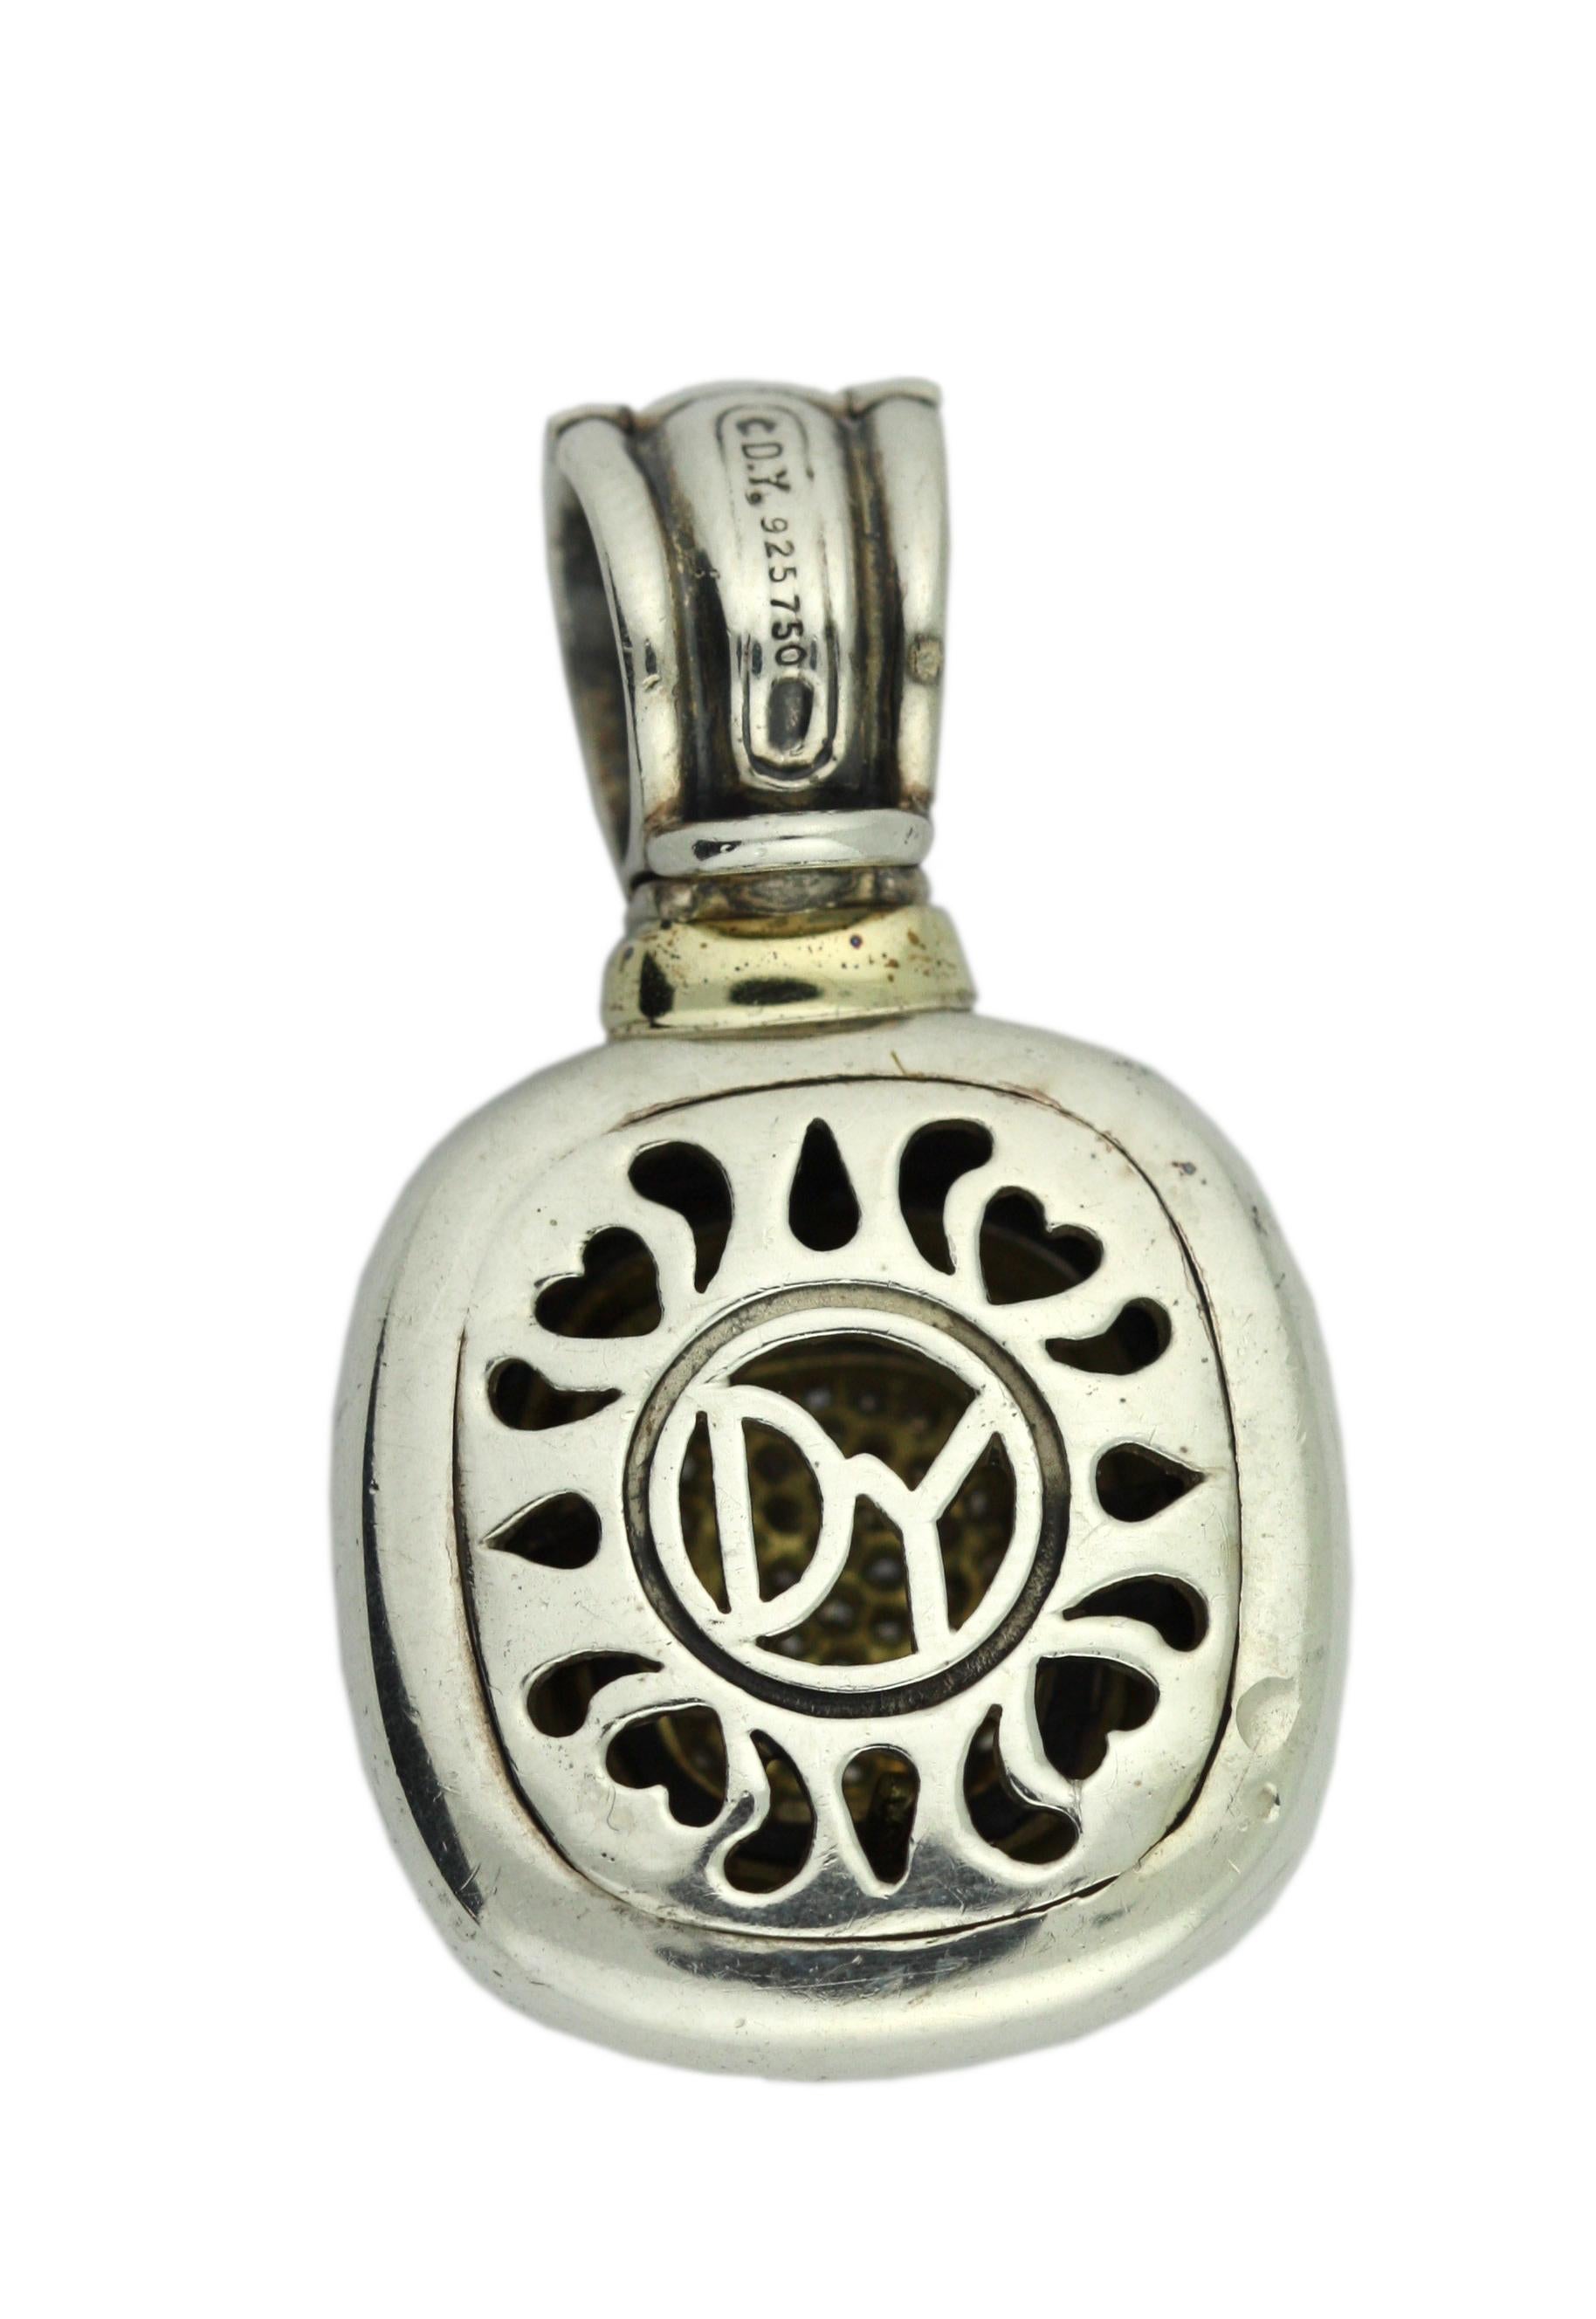 David Yurman
18 karat Gold and Silver Pendant
length 1 1/2 inches, gross weight 20 grams,
initialed D. Y, stamped: 925 750